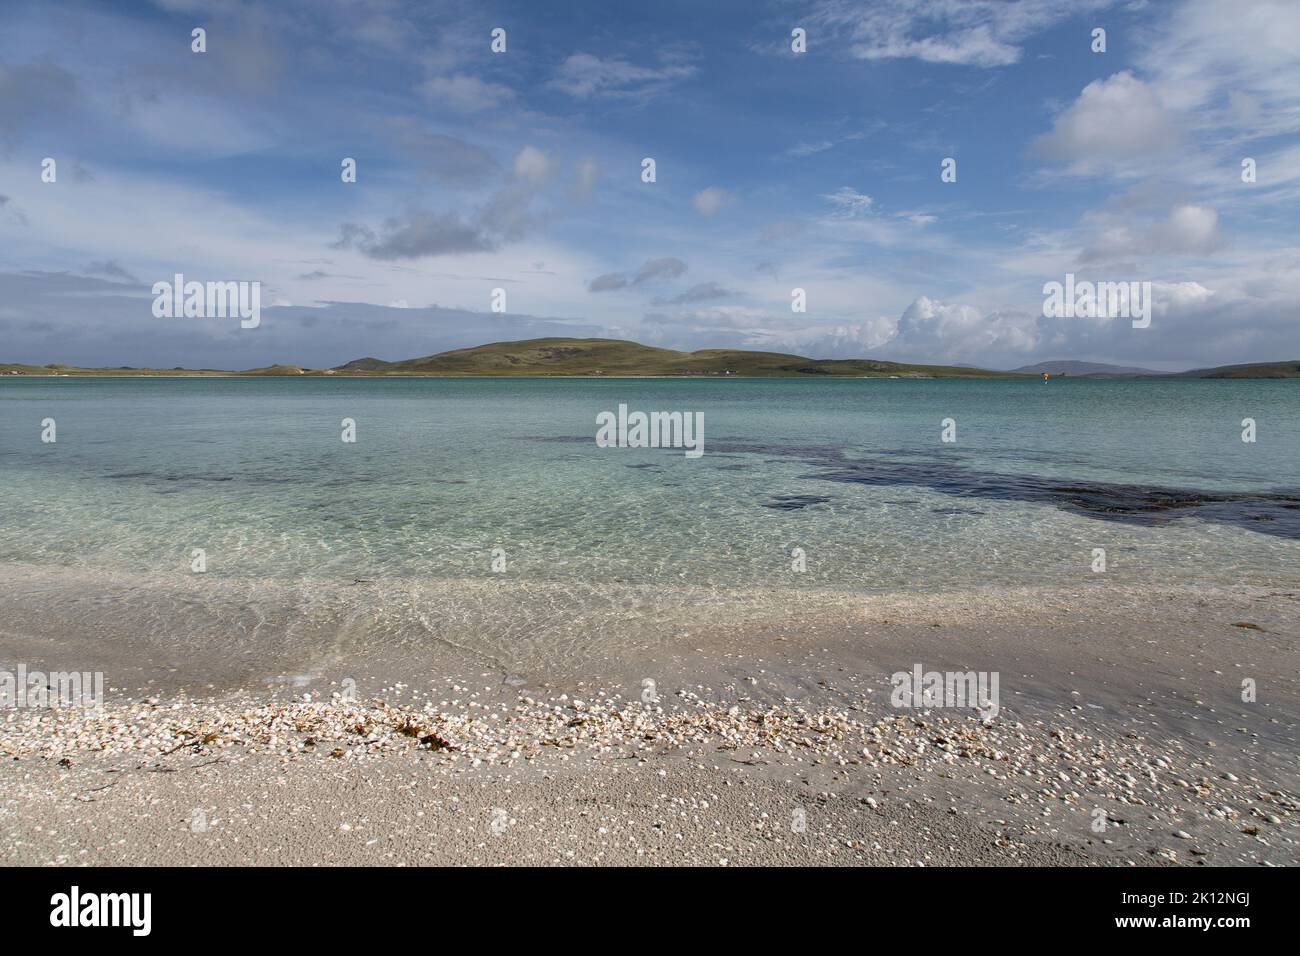 Crystal Clear Sea at Traigh Mhor Beach, Isle of Barra, Outer Hebrides, Western Isles, Scotland, United Kingdom, Great Britain Stock Photo